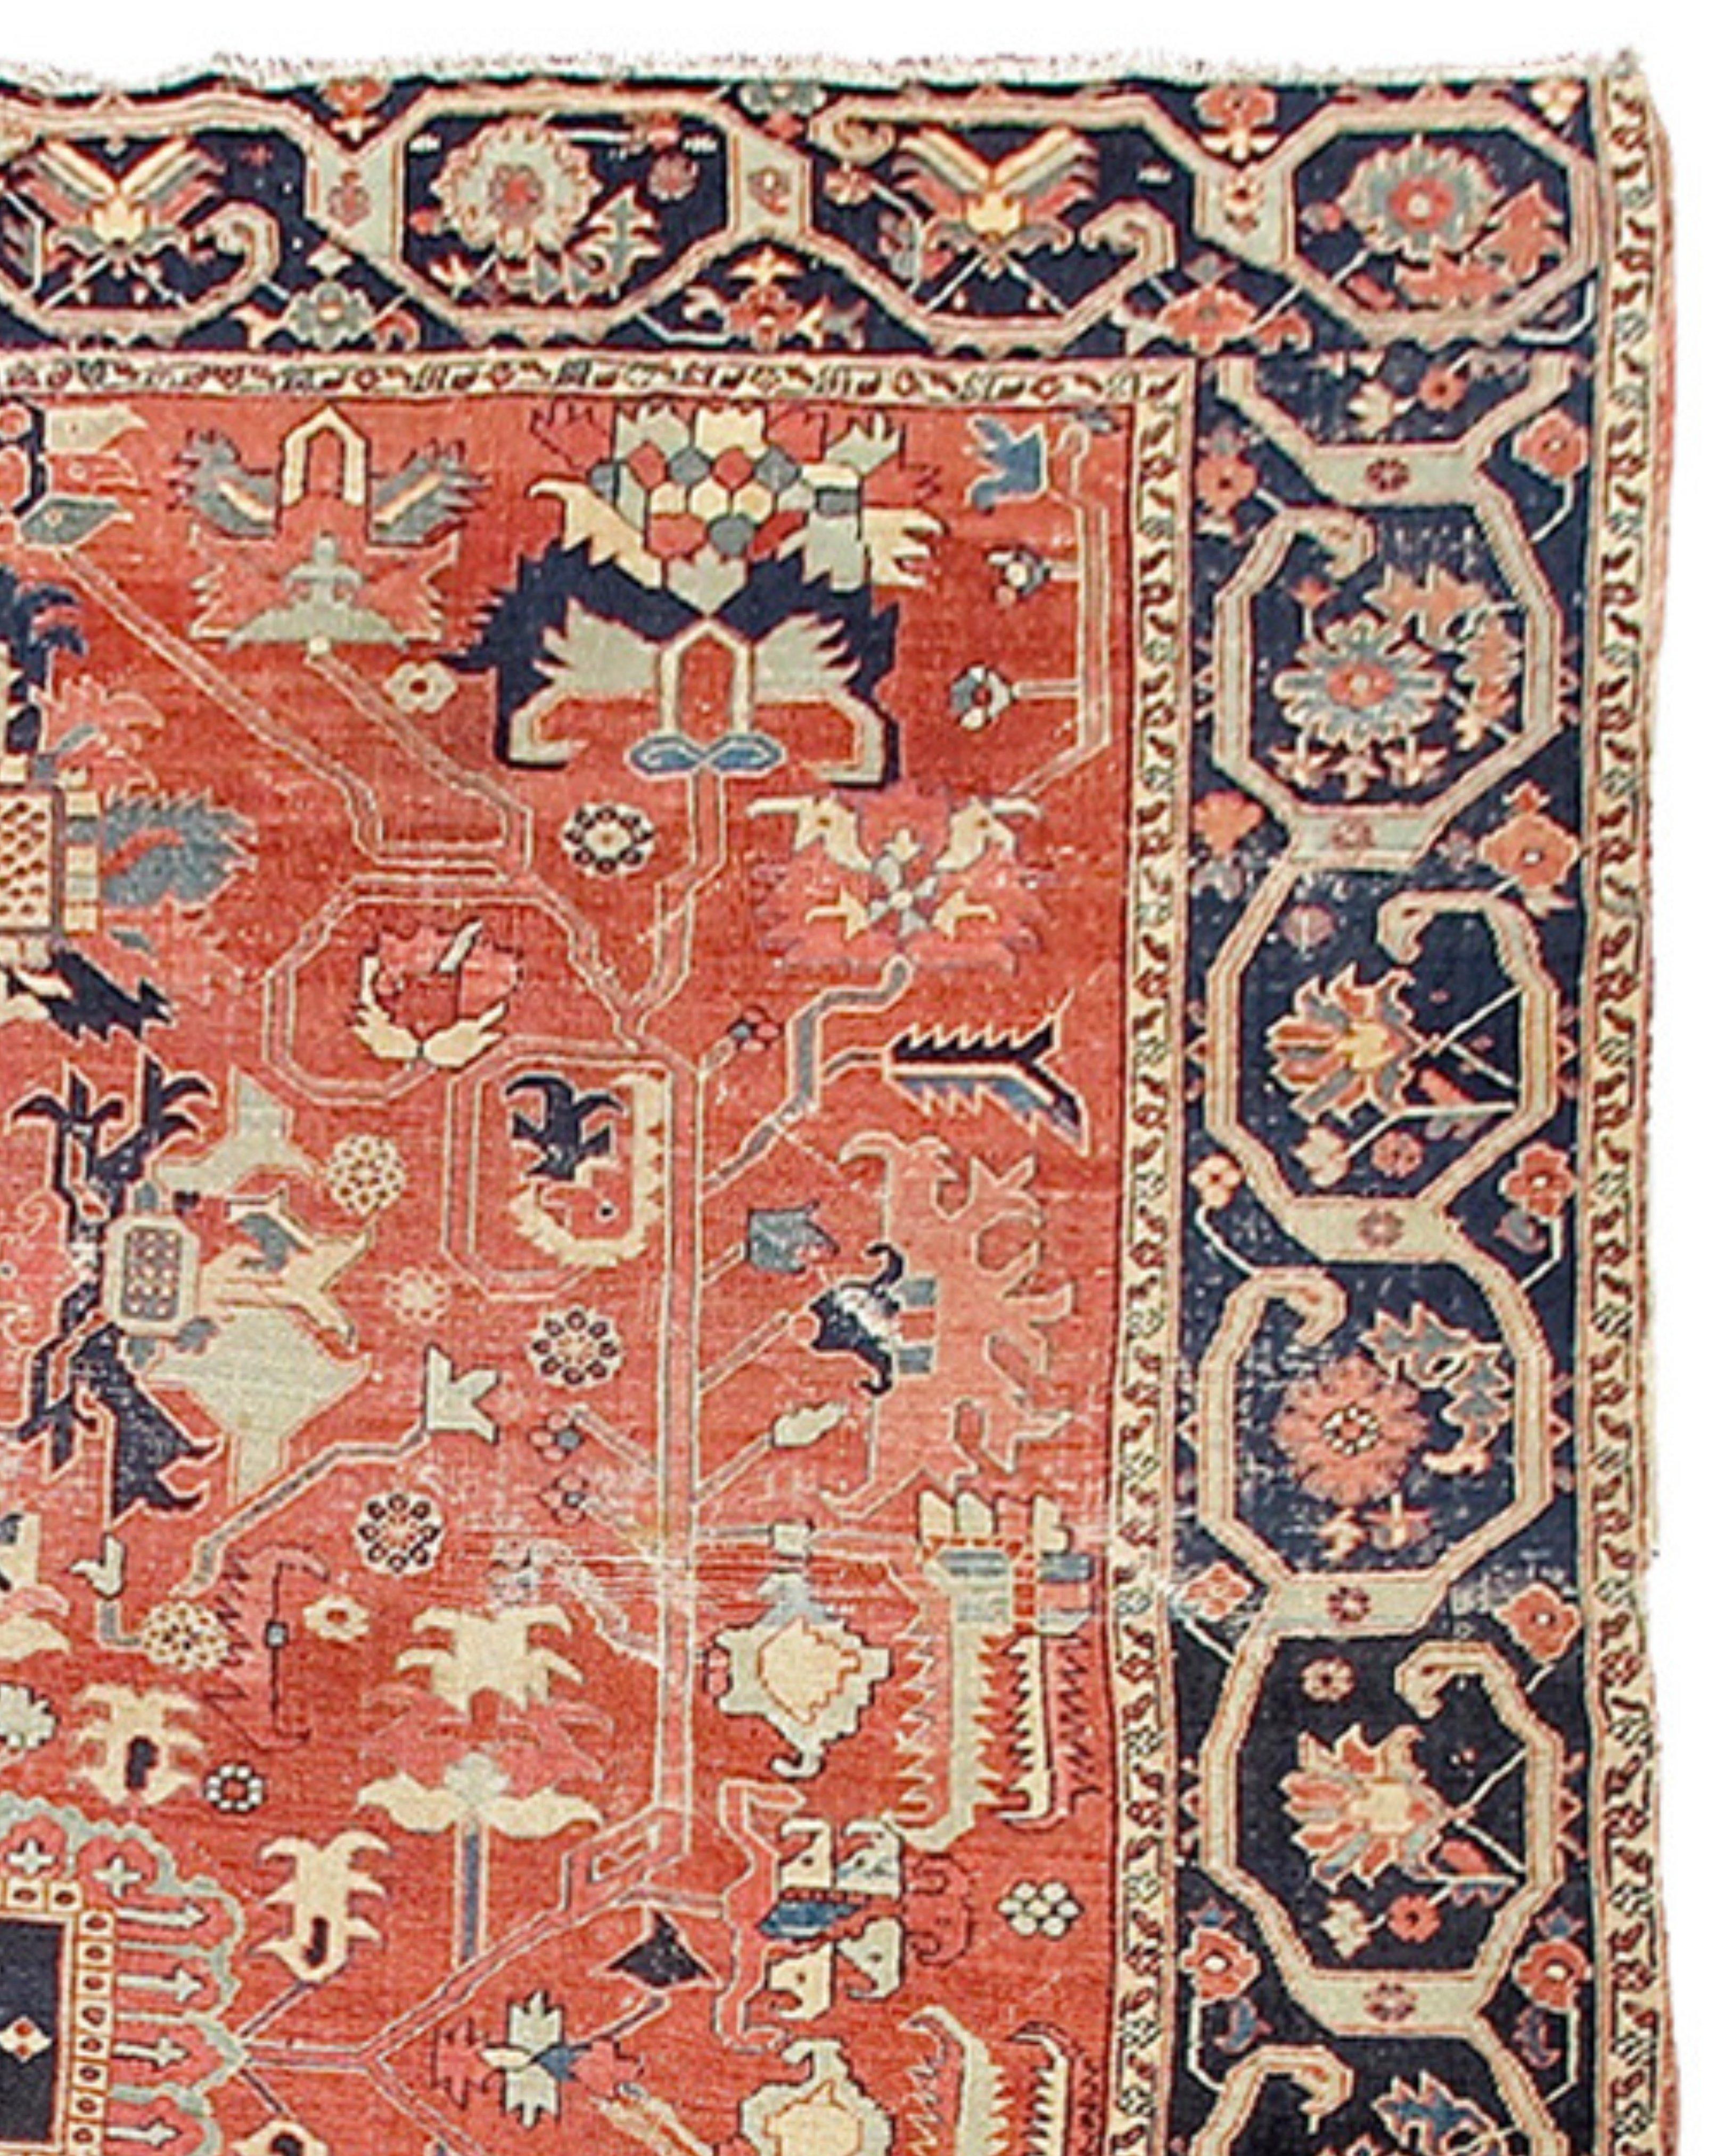 Antique Persian Serapi Rug, Late 19th Century

Additional information:
Dimensions: 8'10